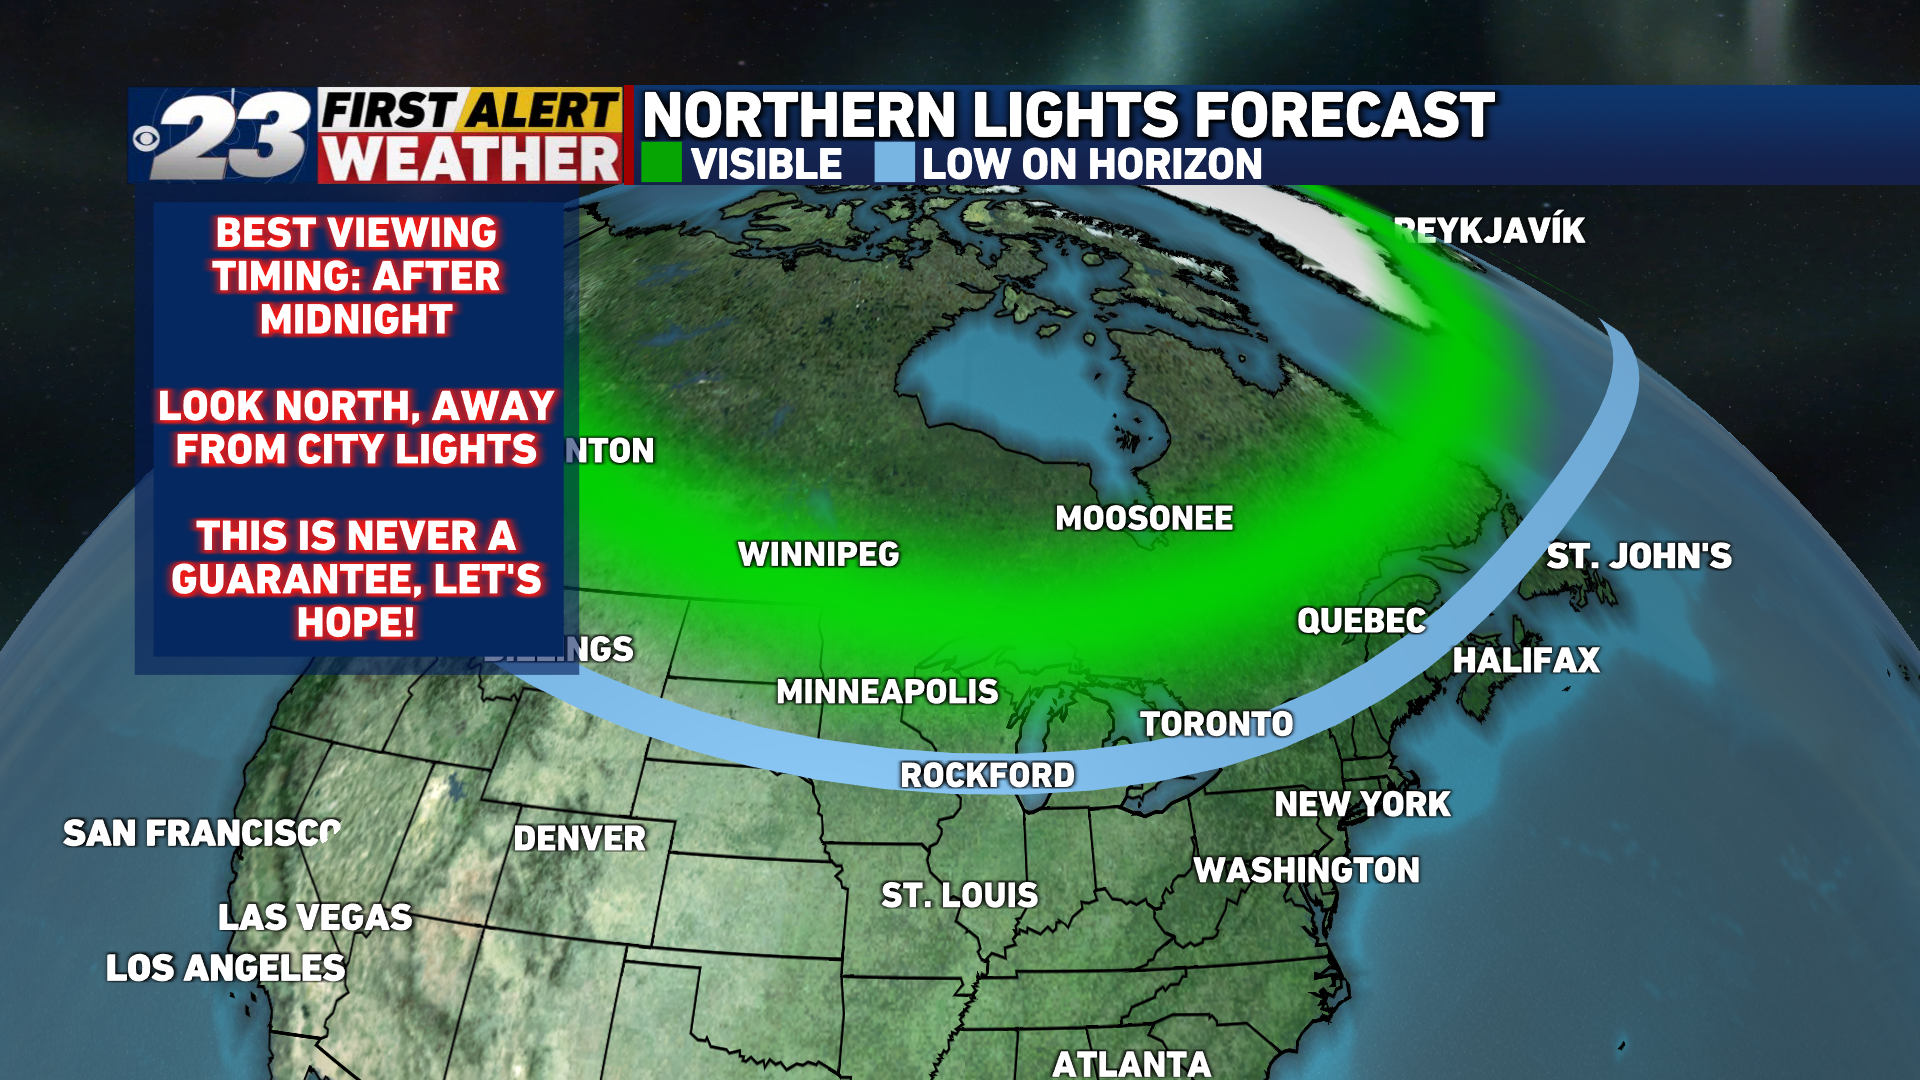 Silicon Panorama temperament Parts of region could see Northern Lights Wednesday night